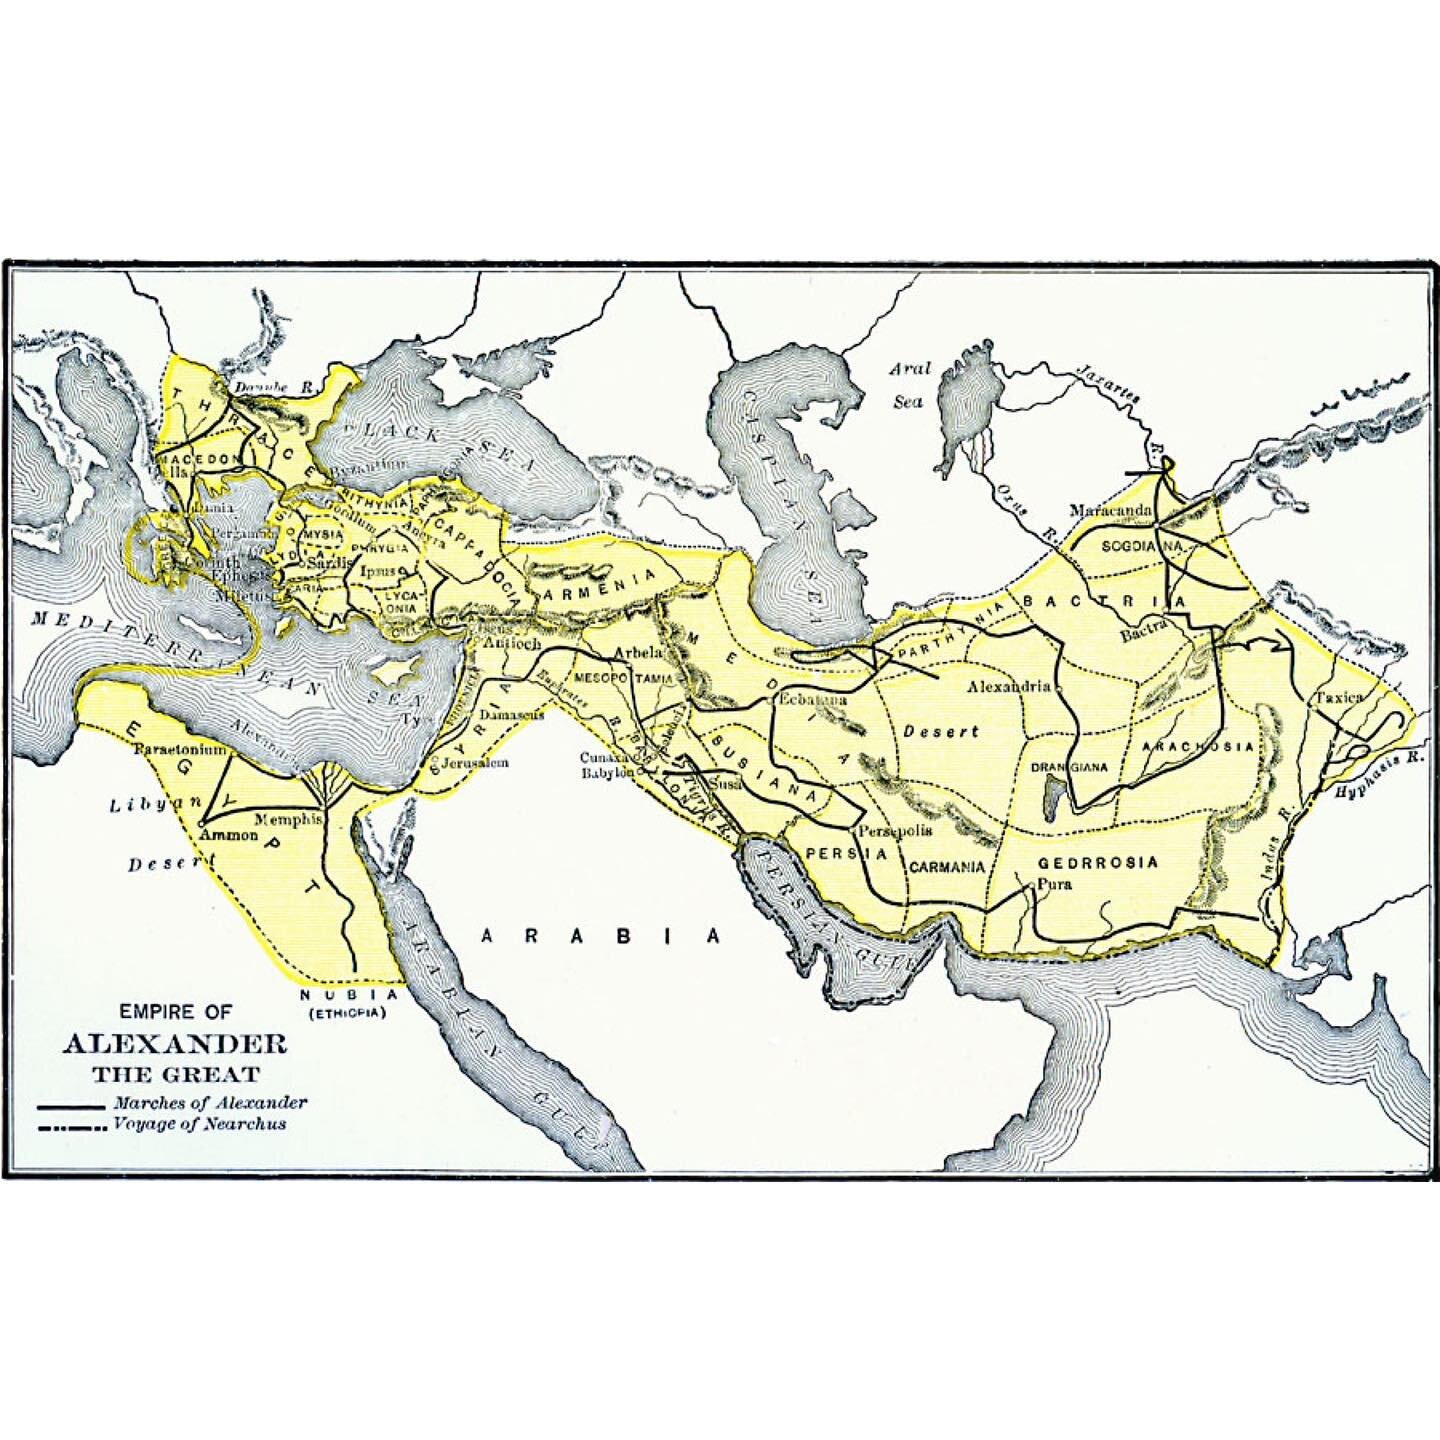 Alexander returned to Persia from India to begin the work of ruling his new empire. He seemed frankly uninterested in dealing with the logistical nightmare that was the governing of his new empire and he was already planning a southern campaign into 